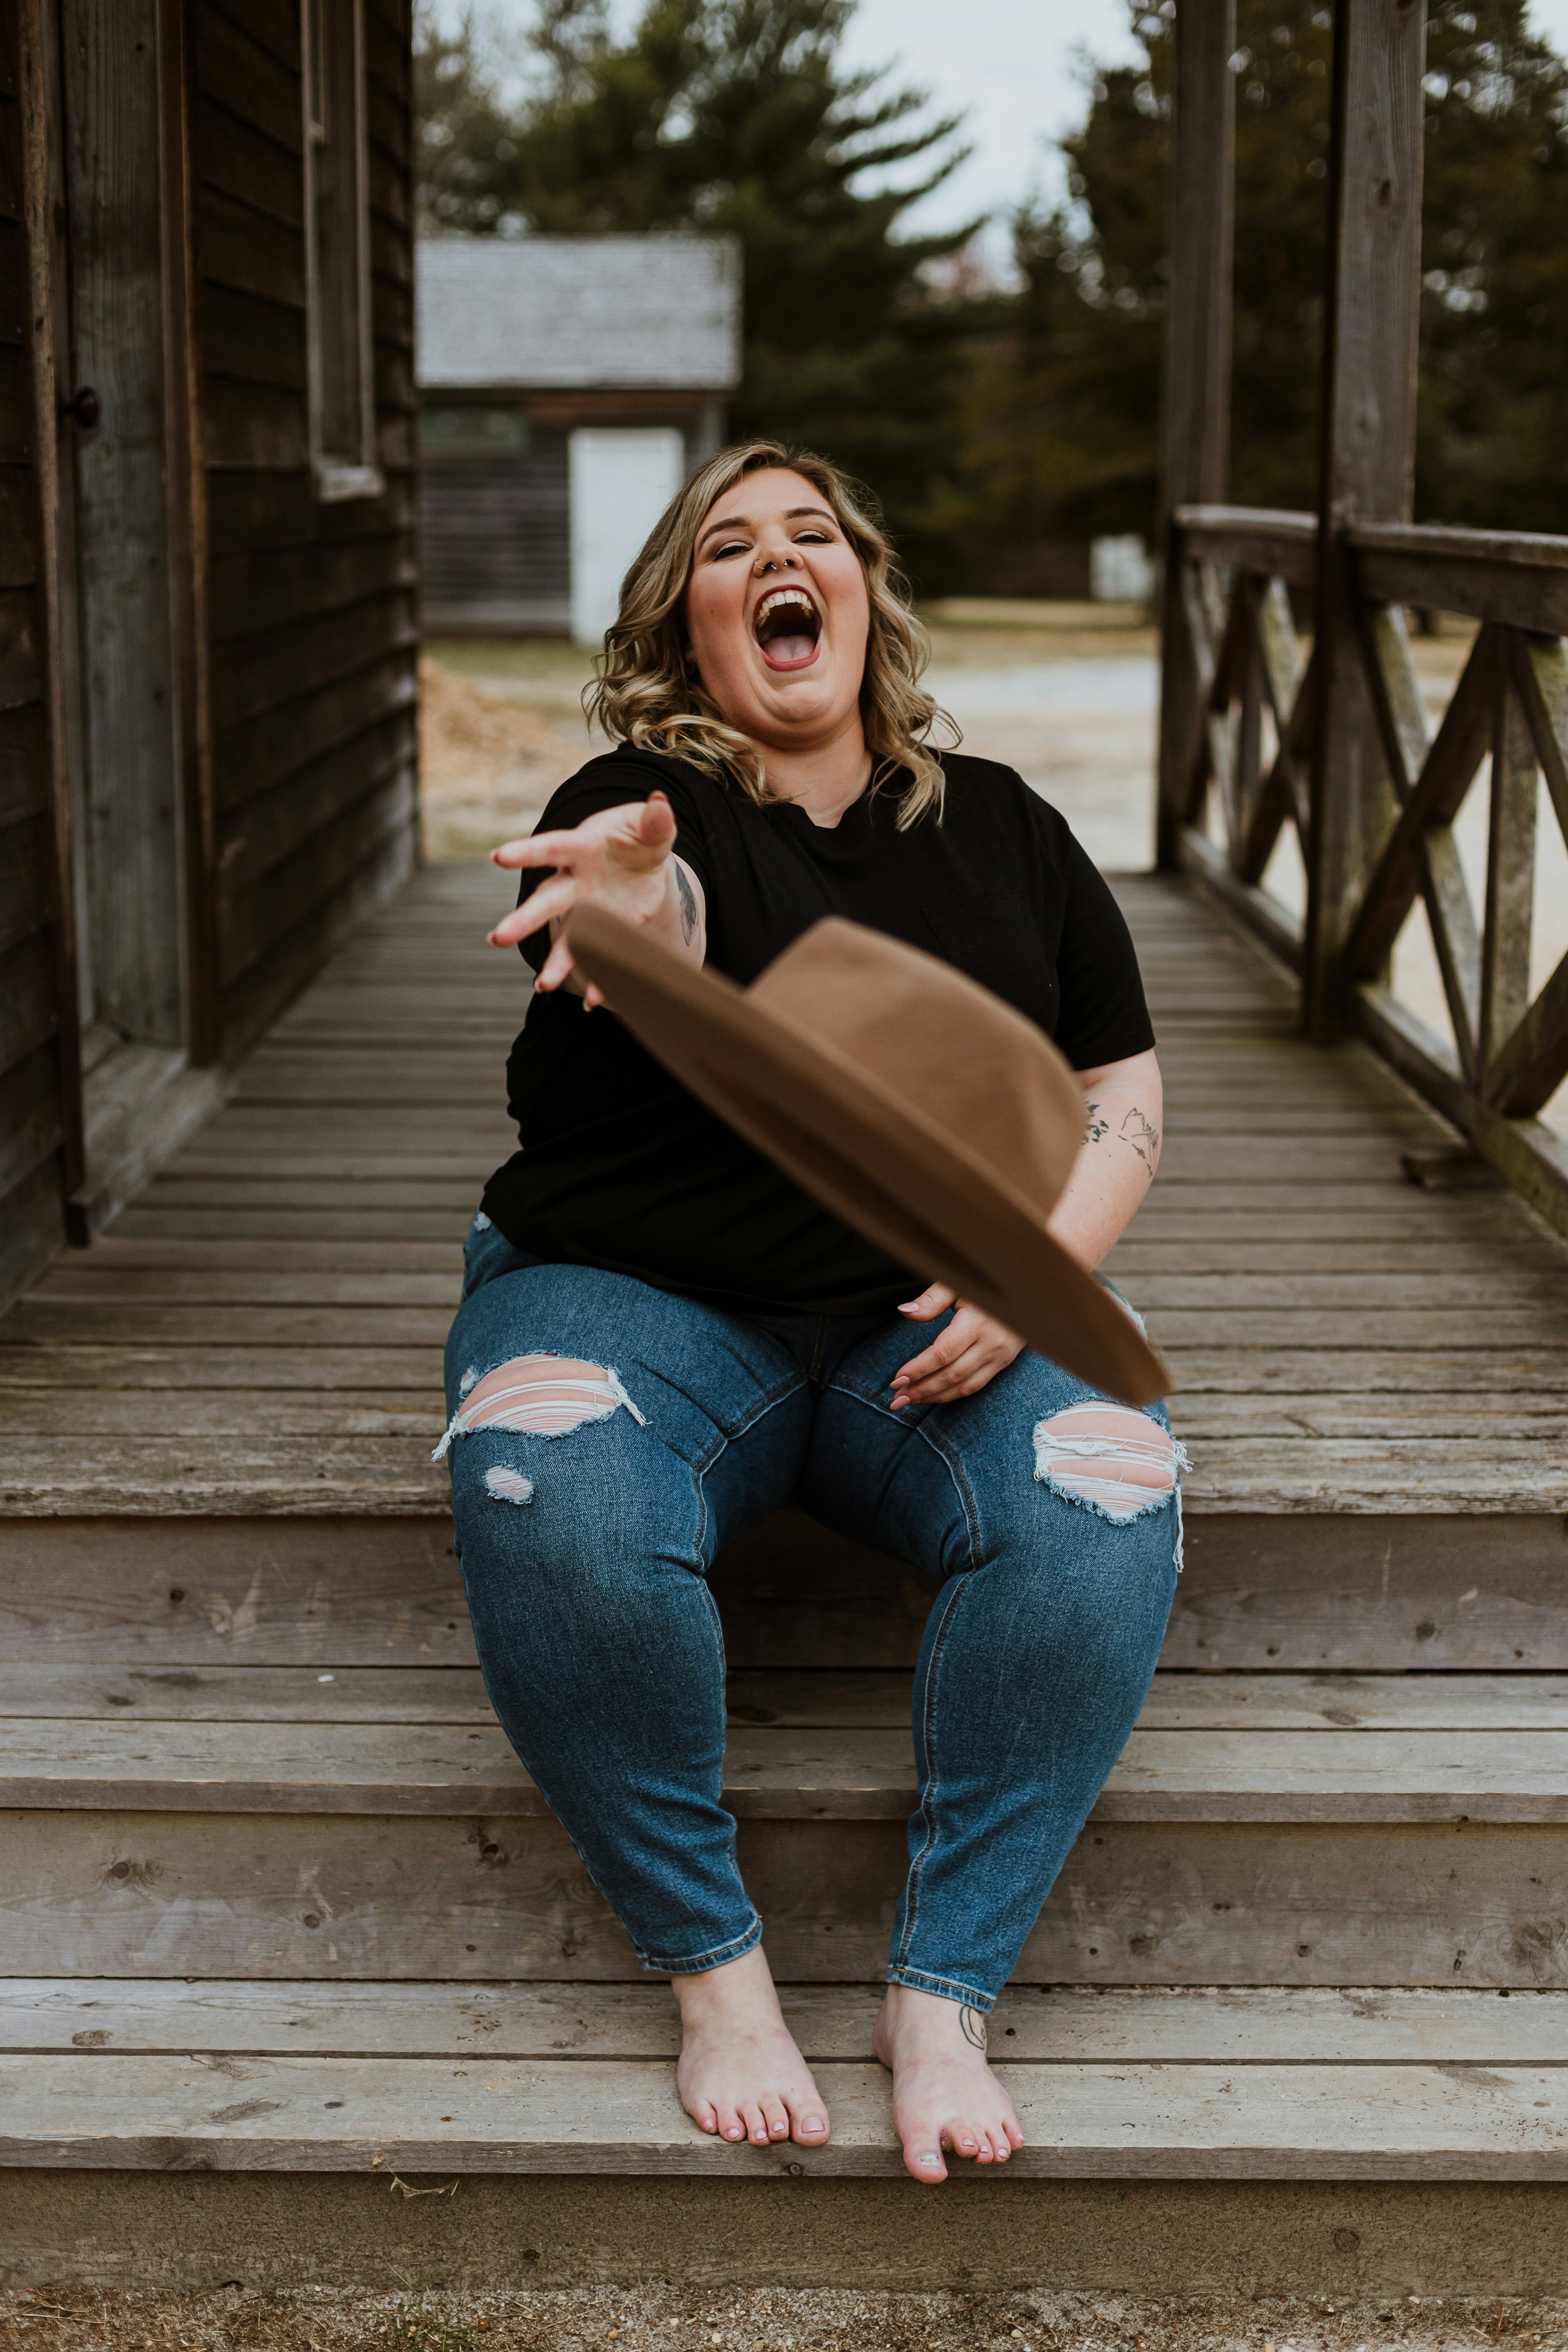 1500+ Fat Woman Pictures Download Free Images on Unsplash